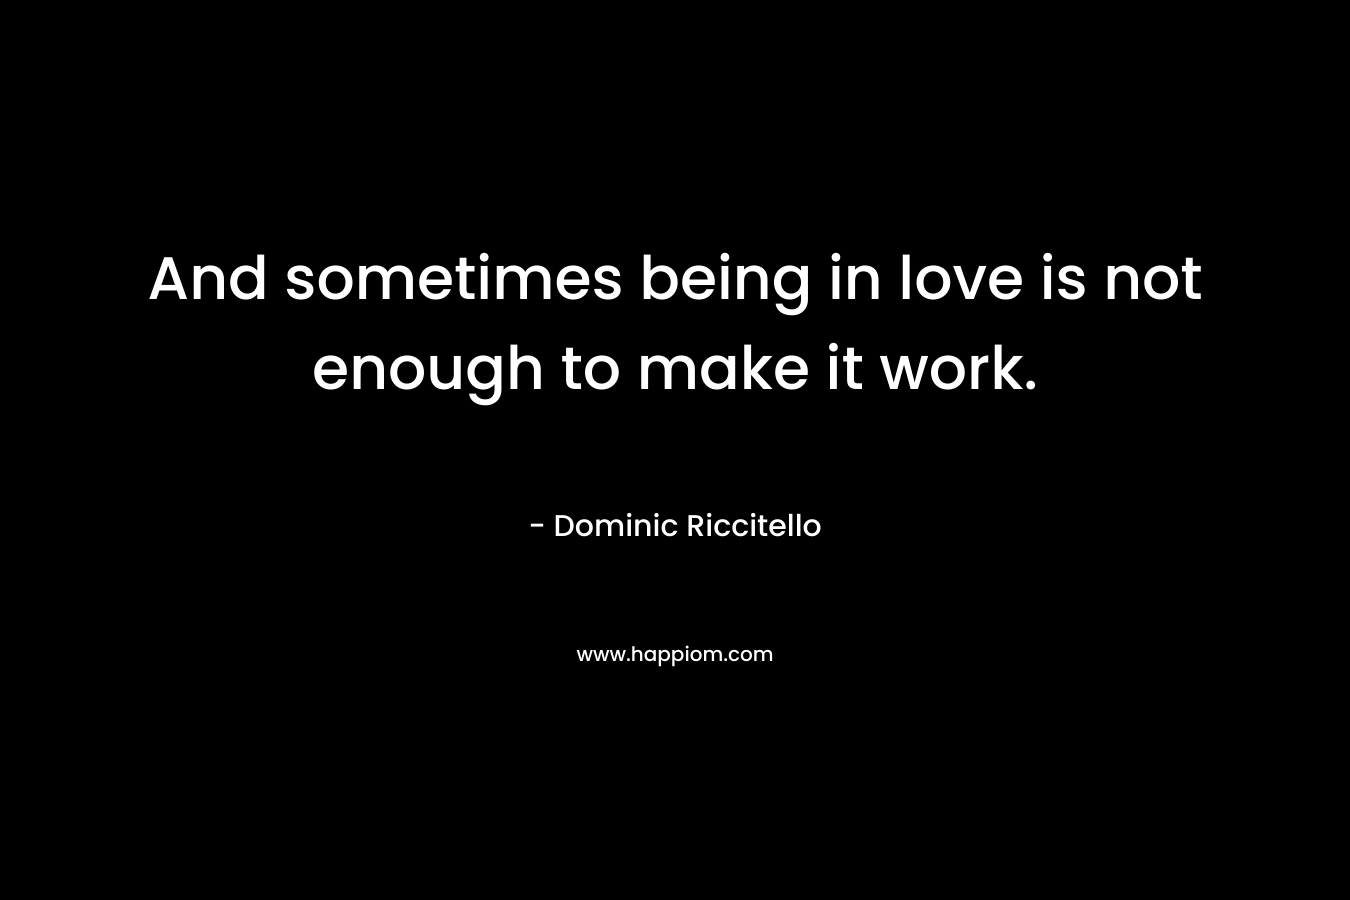 And sometimes being in love is not enough to make it work.